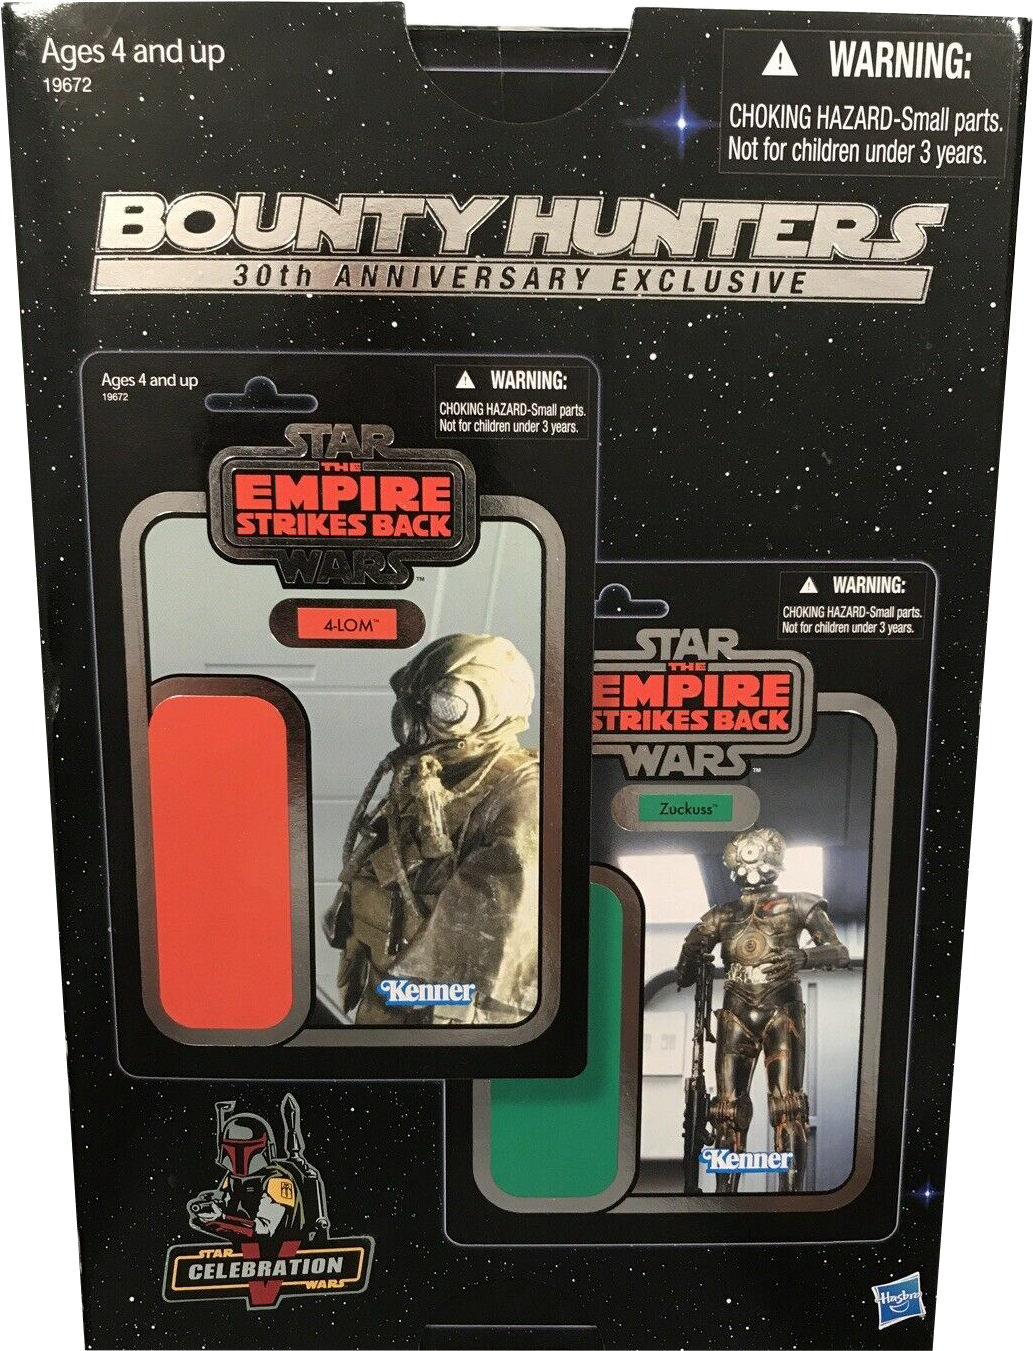 Zuckuss Star Wars The Vintage Collection EXCLUSIVE Bounty Hunter 2 pack 4-Lom 